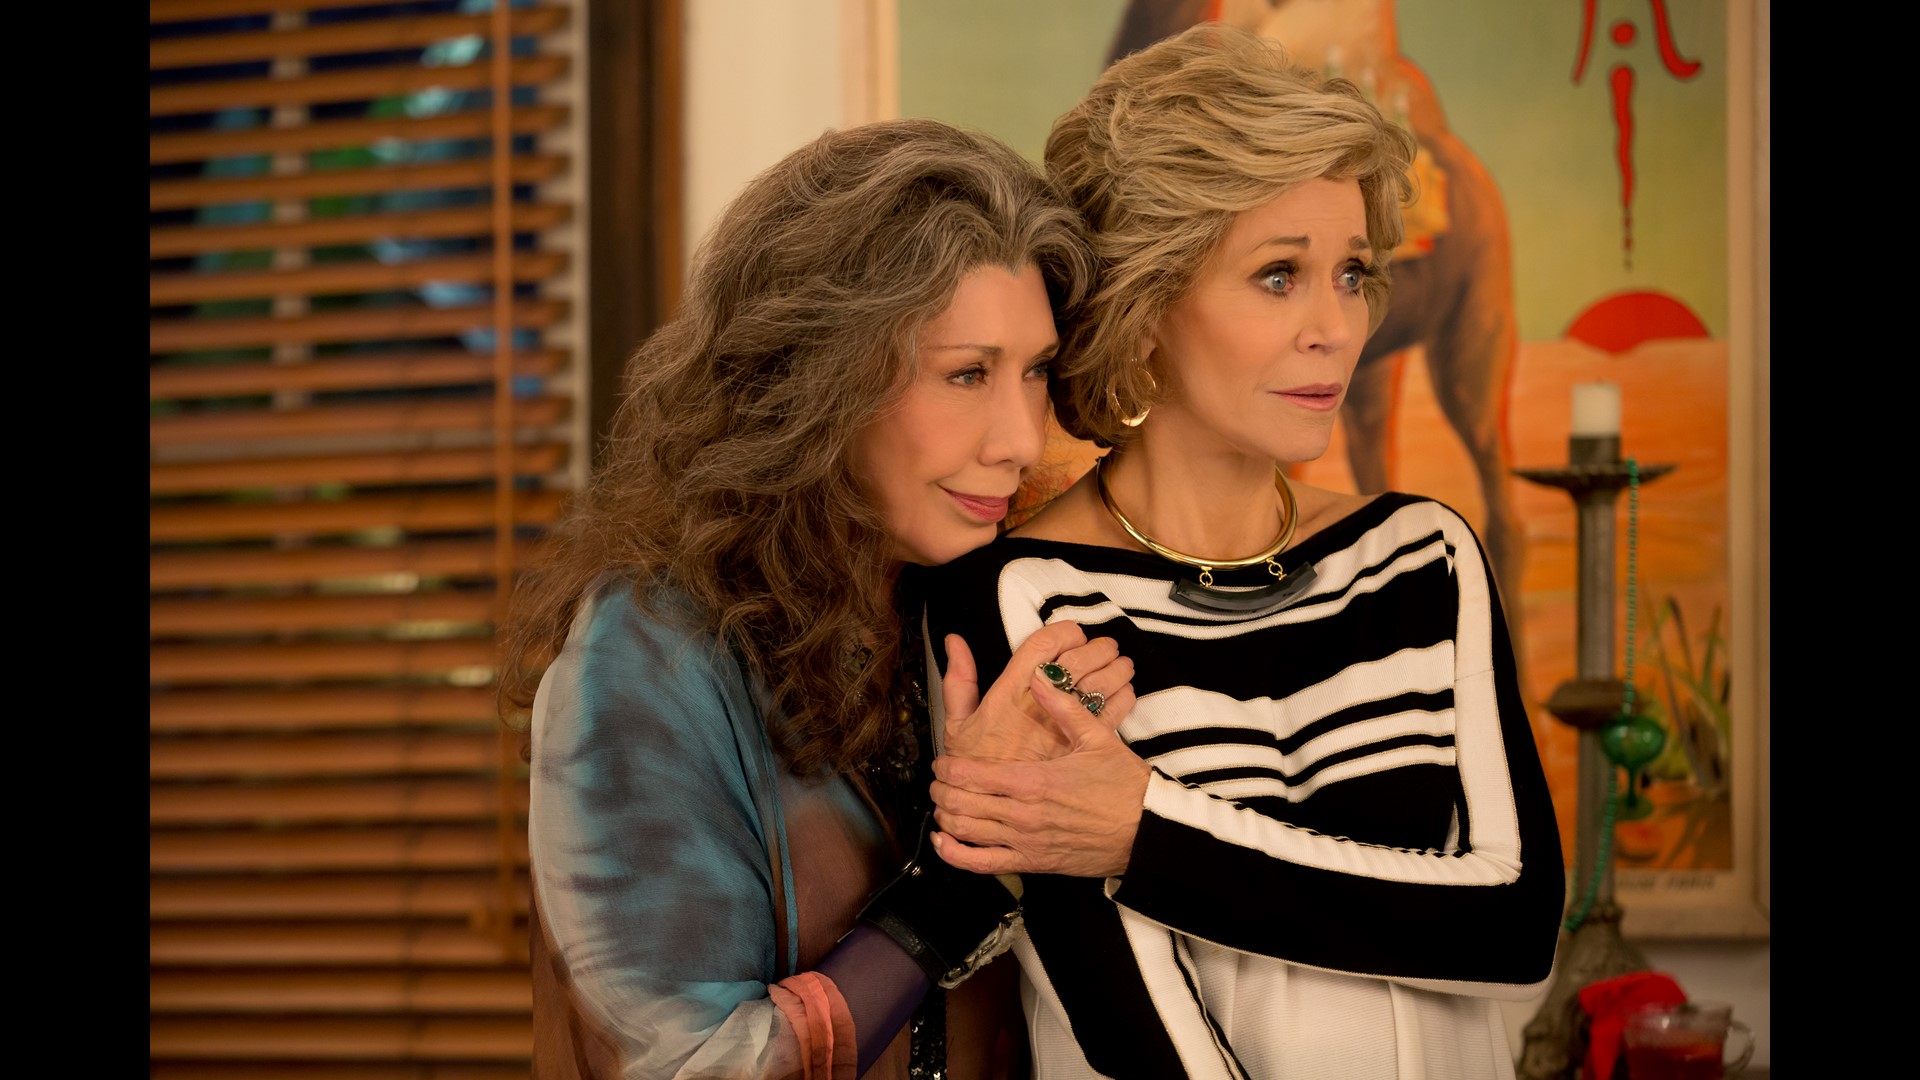 'Grace & Frankie,' 'The Punisher,' plus 'IO' join Netflix, plus more series and movies to watch today. Here's the latest from Director's Chair.